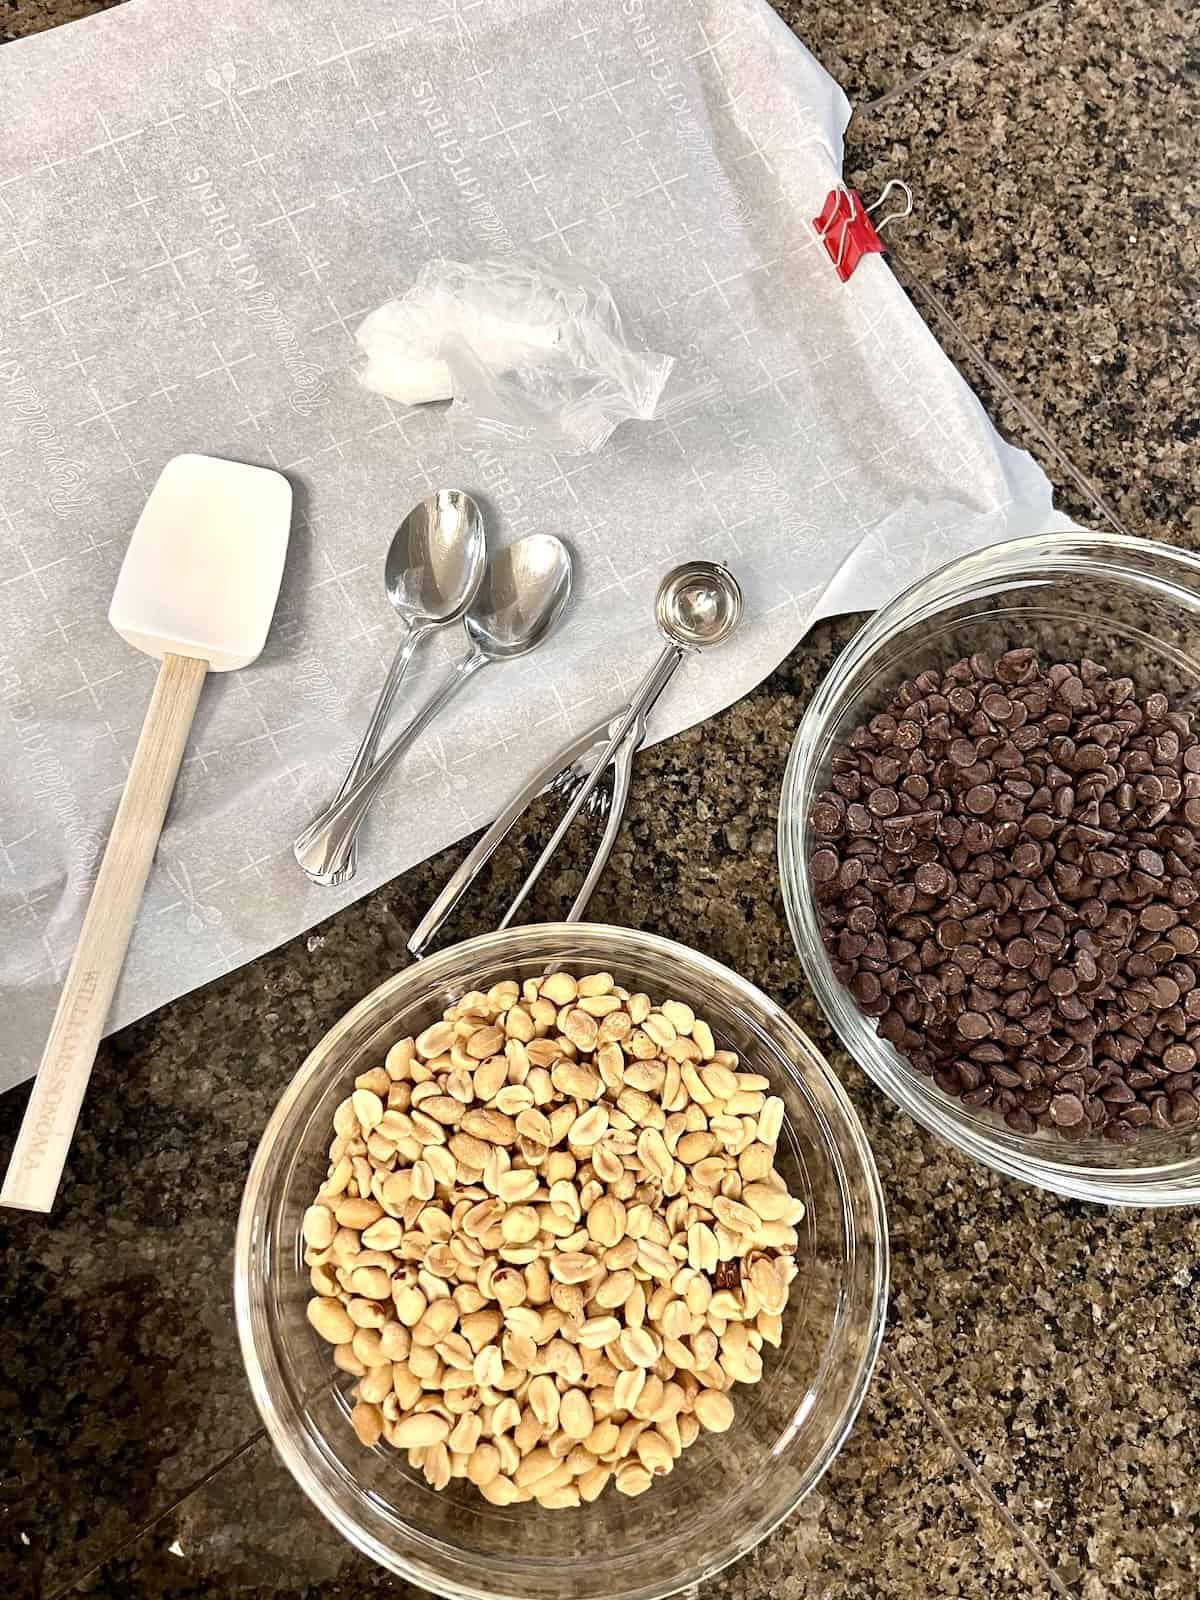 Bowls and utensils needed to make chocolate and peanut cluster candies. 